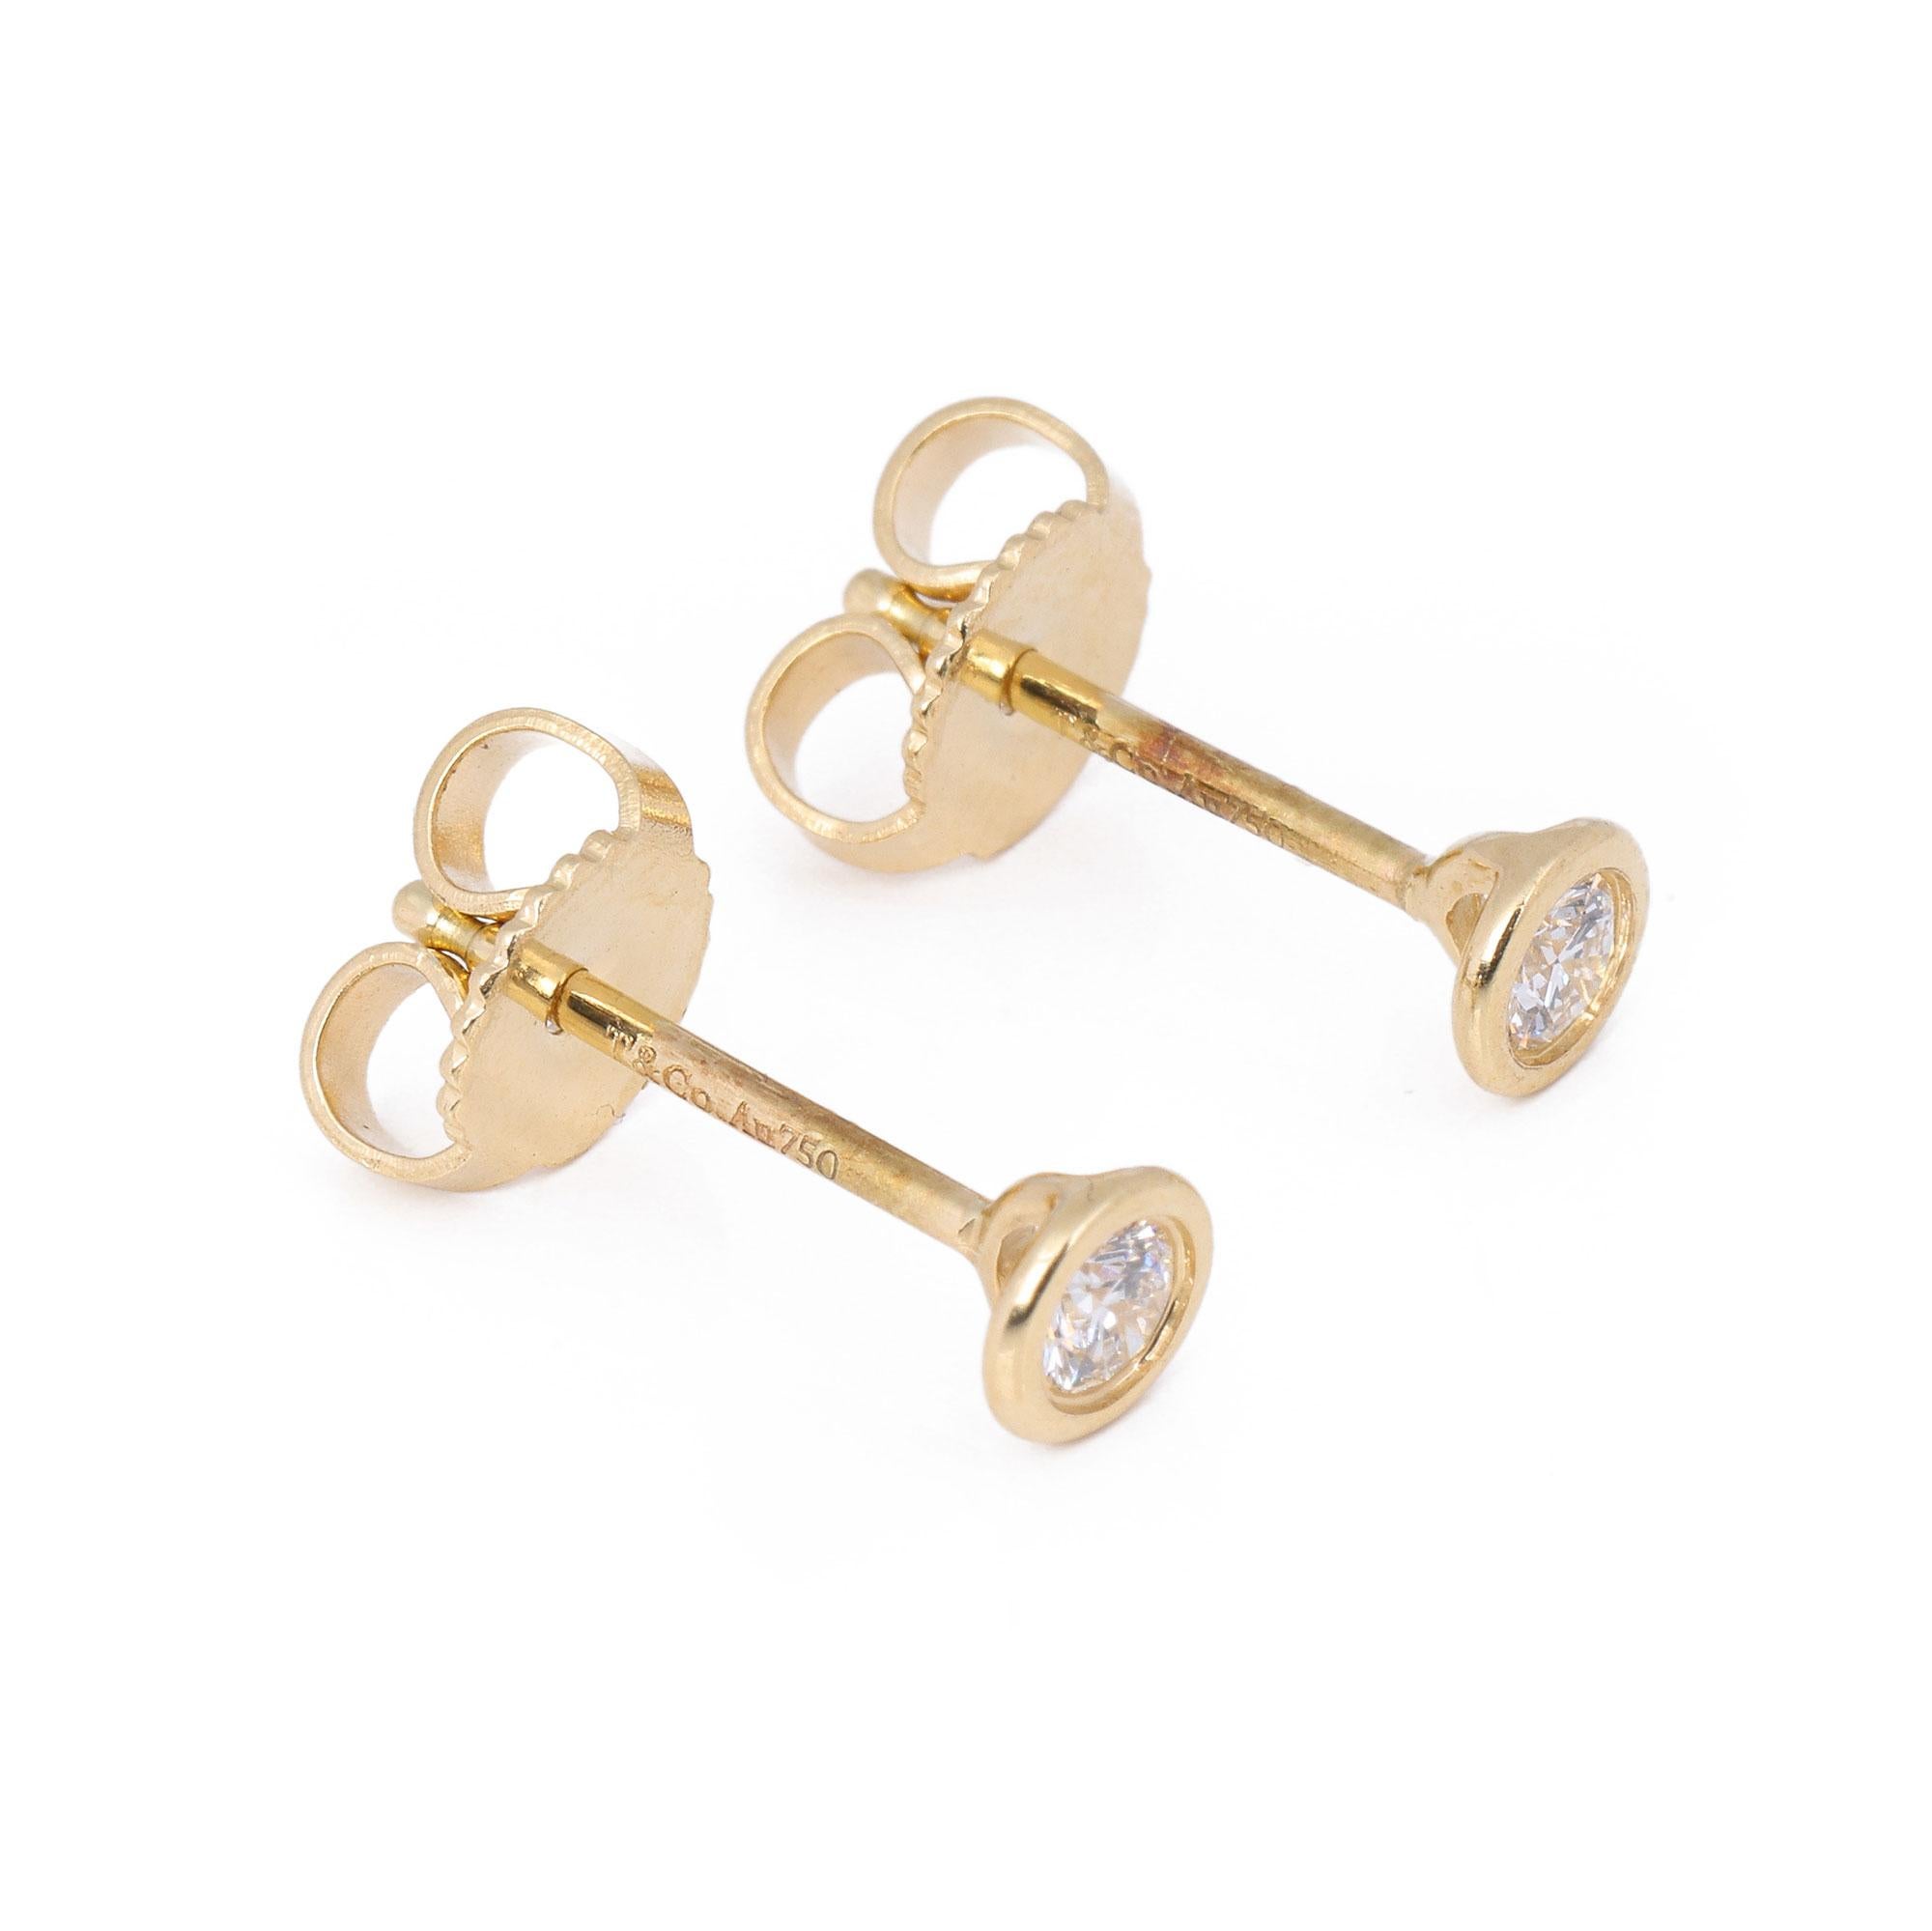 These earrings by Tiffany & Co are from their Elsa Peretti Diamond by the Yard collection and feature two round brilliant cut diamonds set in yellow gold. Complete with Xupes presentation box. Our Xupes reference is J556 should you need to quote